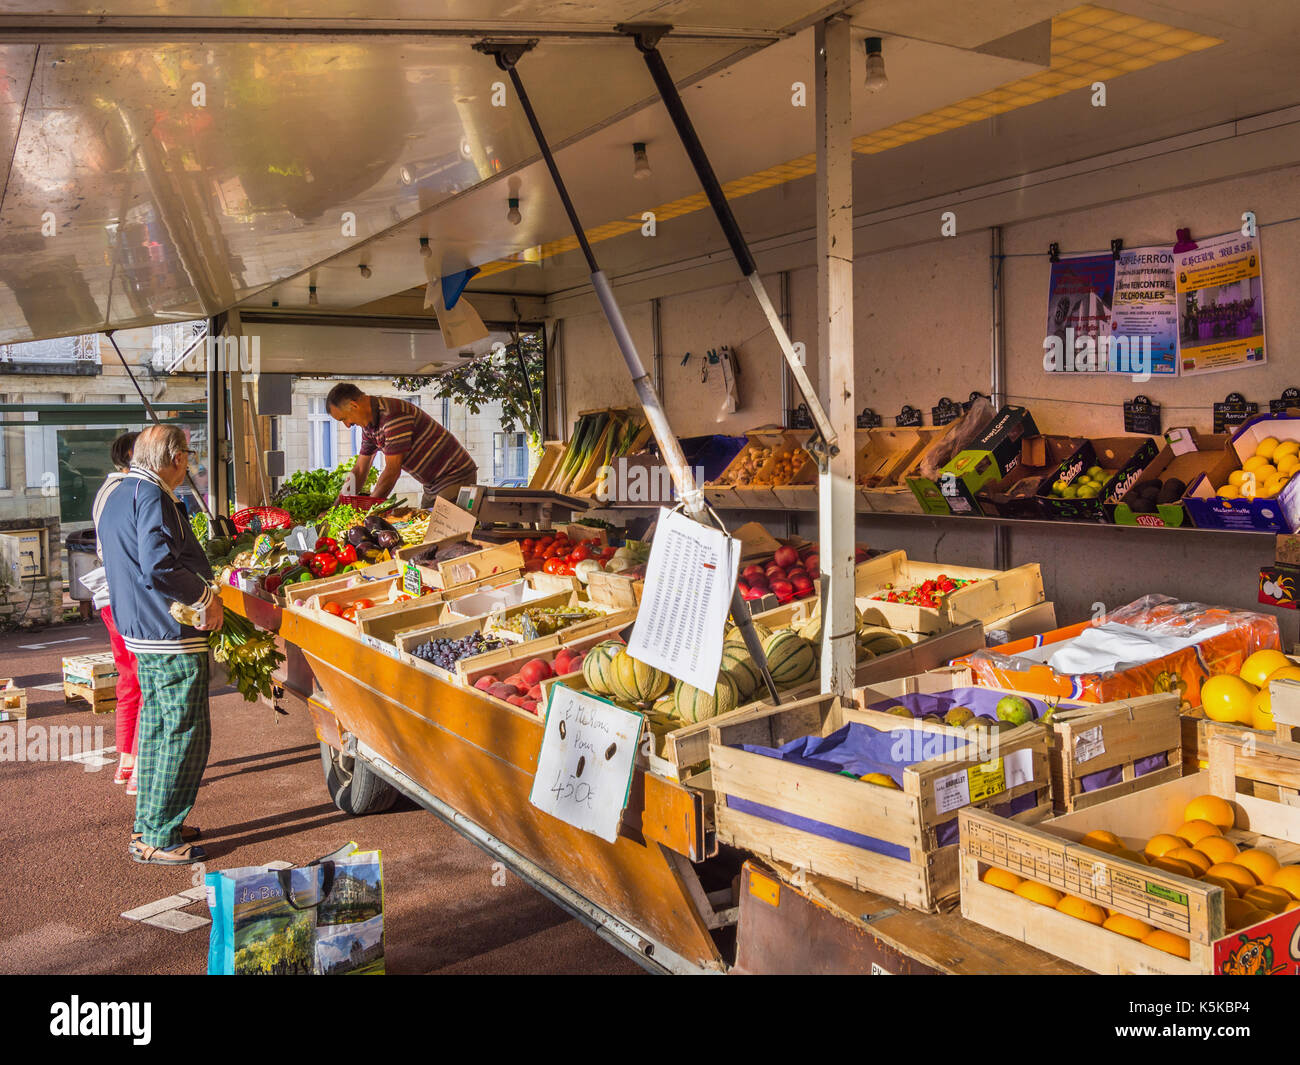 Open-sided vegetable lorry on market day, Preuilly-sur-Claise, France. Stock Photo